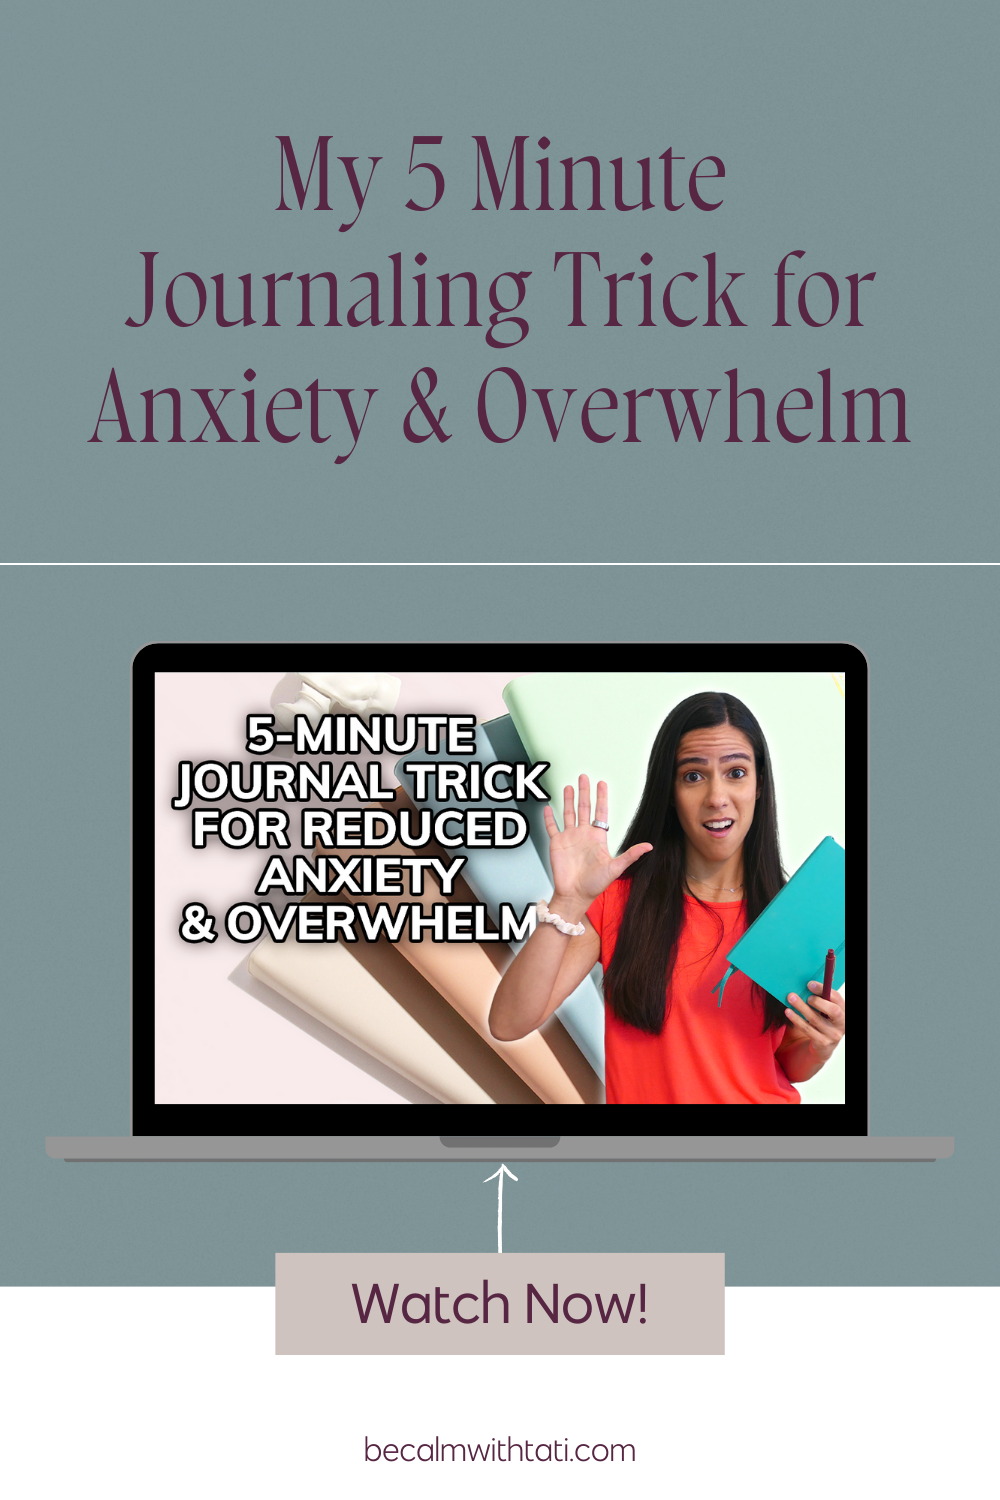 My 5 Minute Journaling Trick for Anxiety & Overwhelm